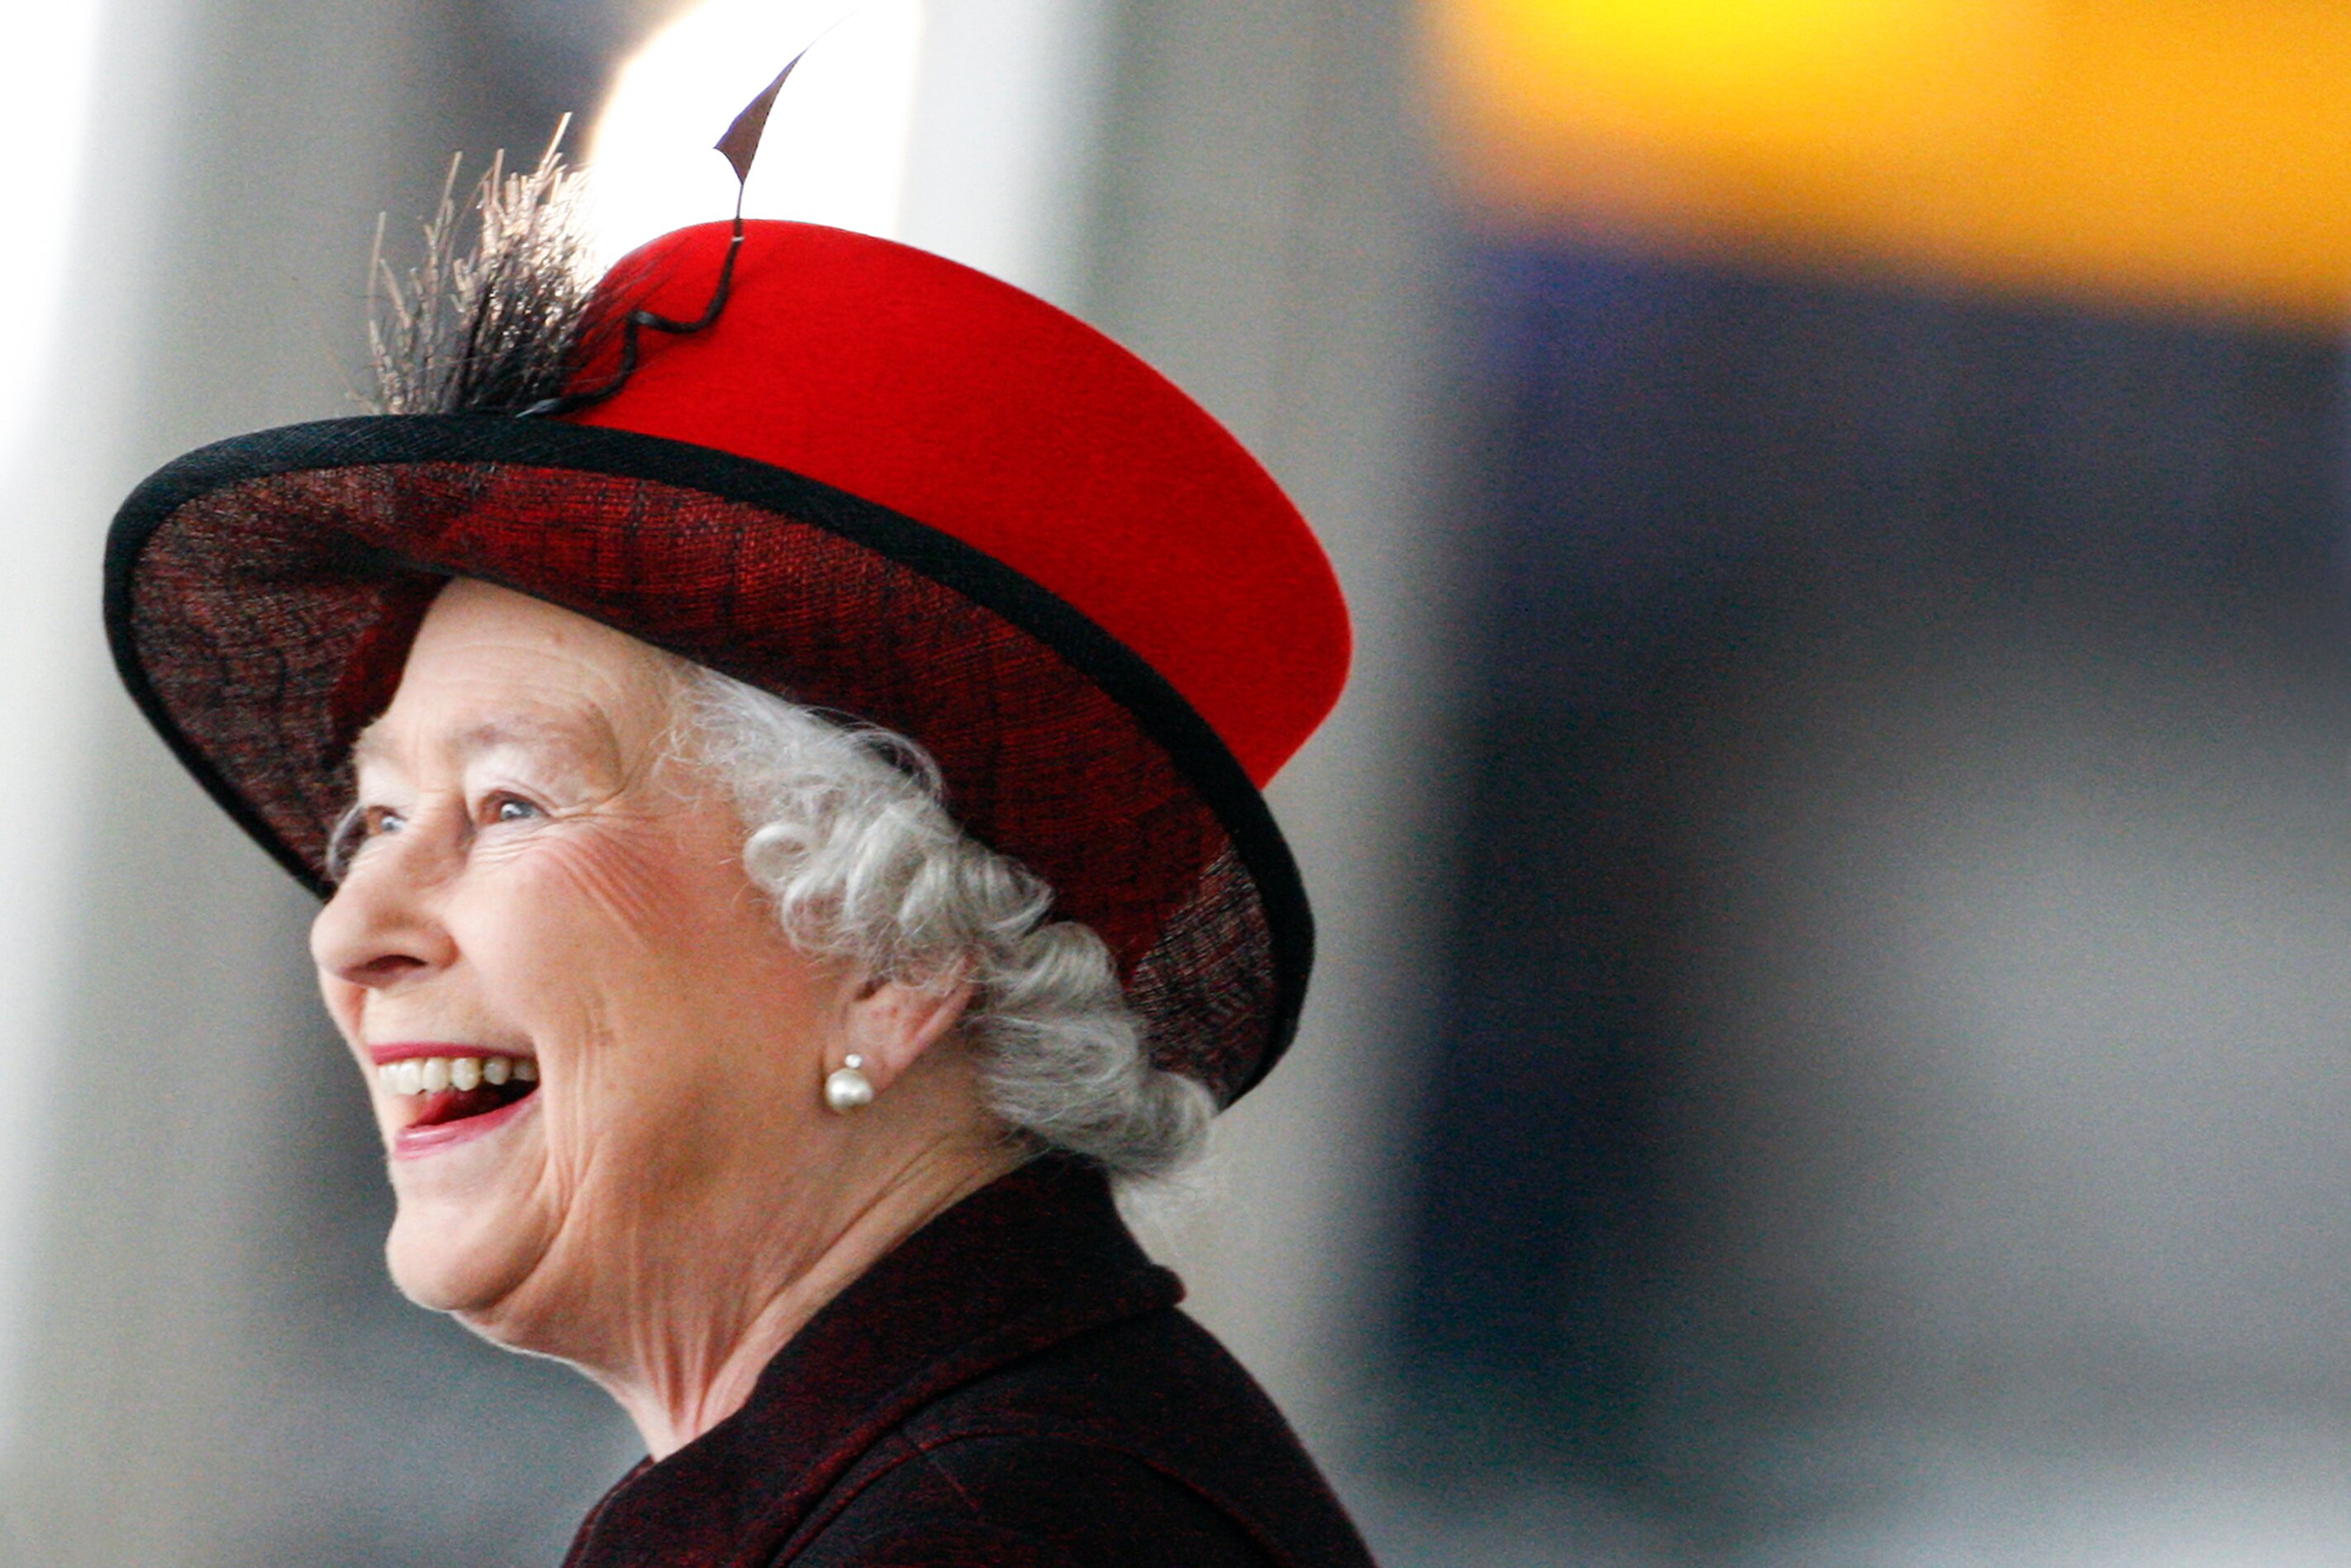 Bank holiday confirmed for date of Queen's funeral